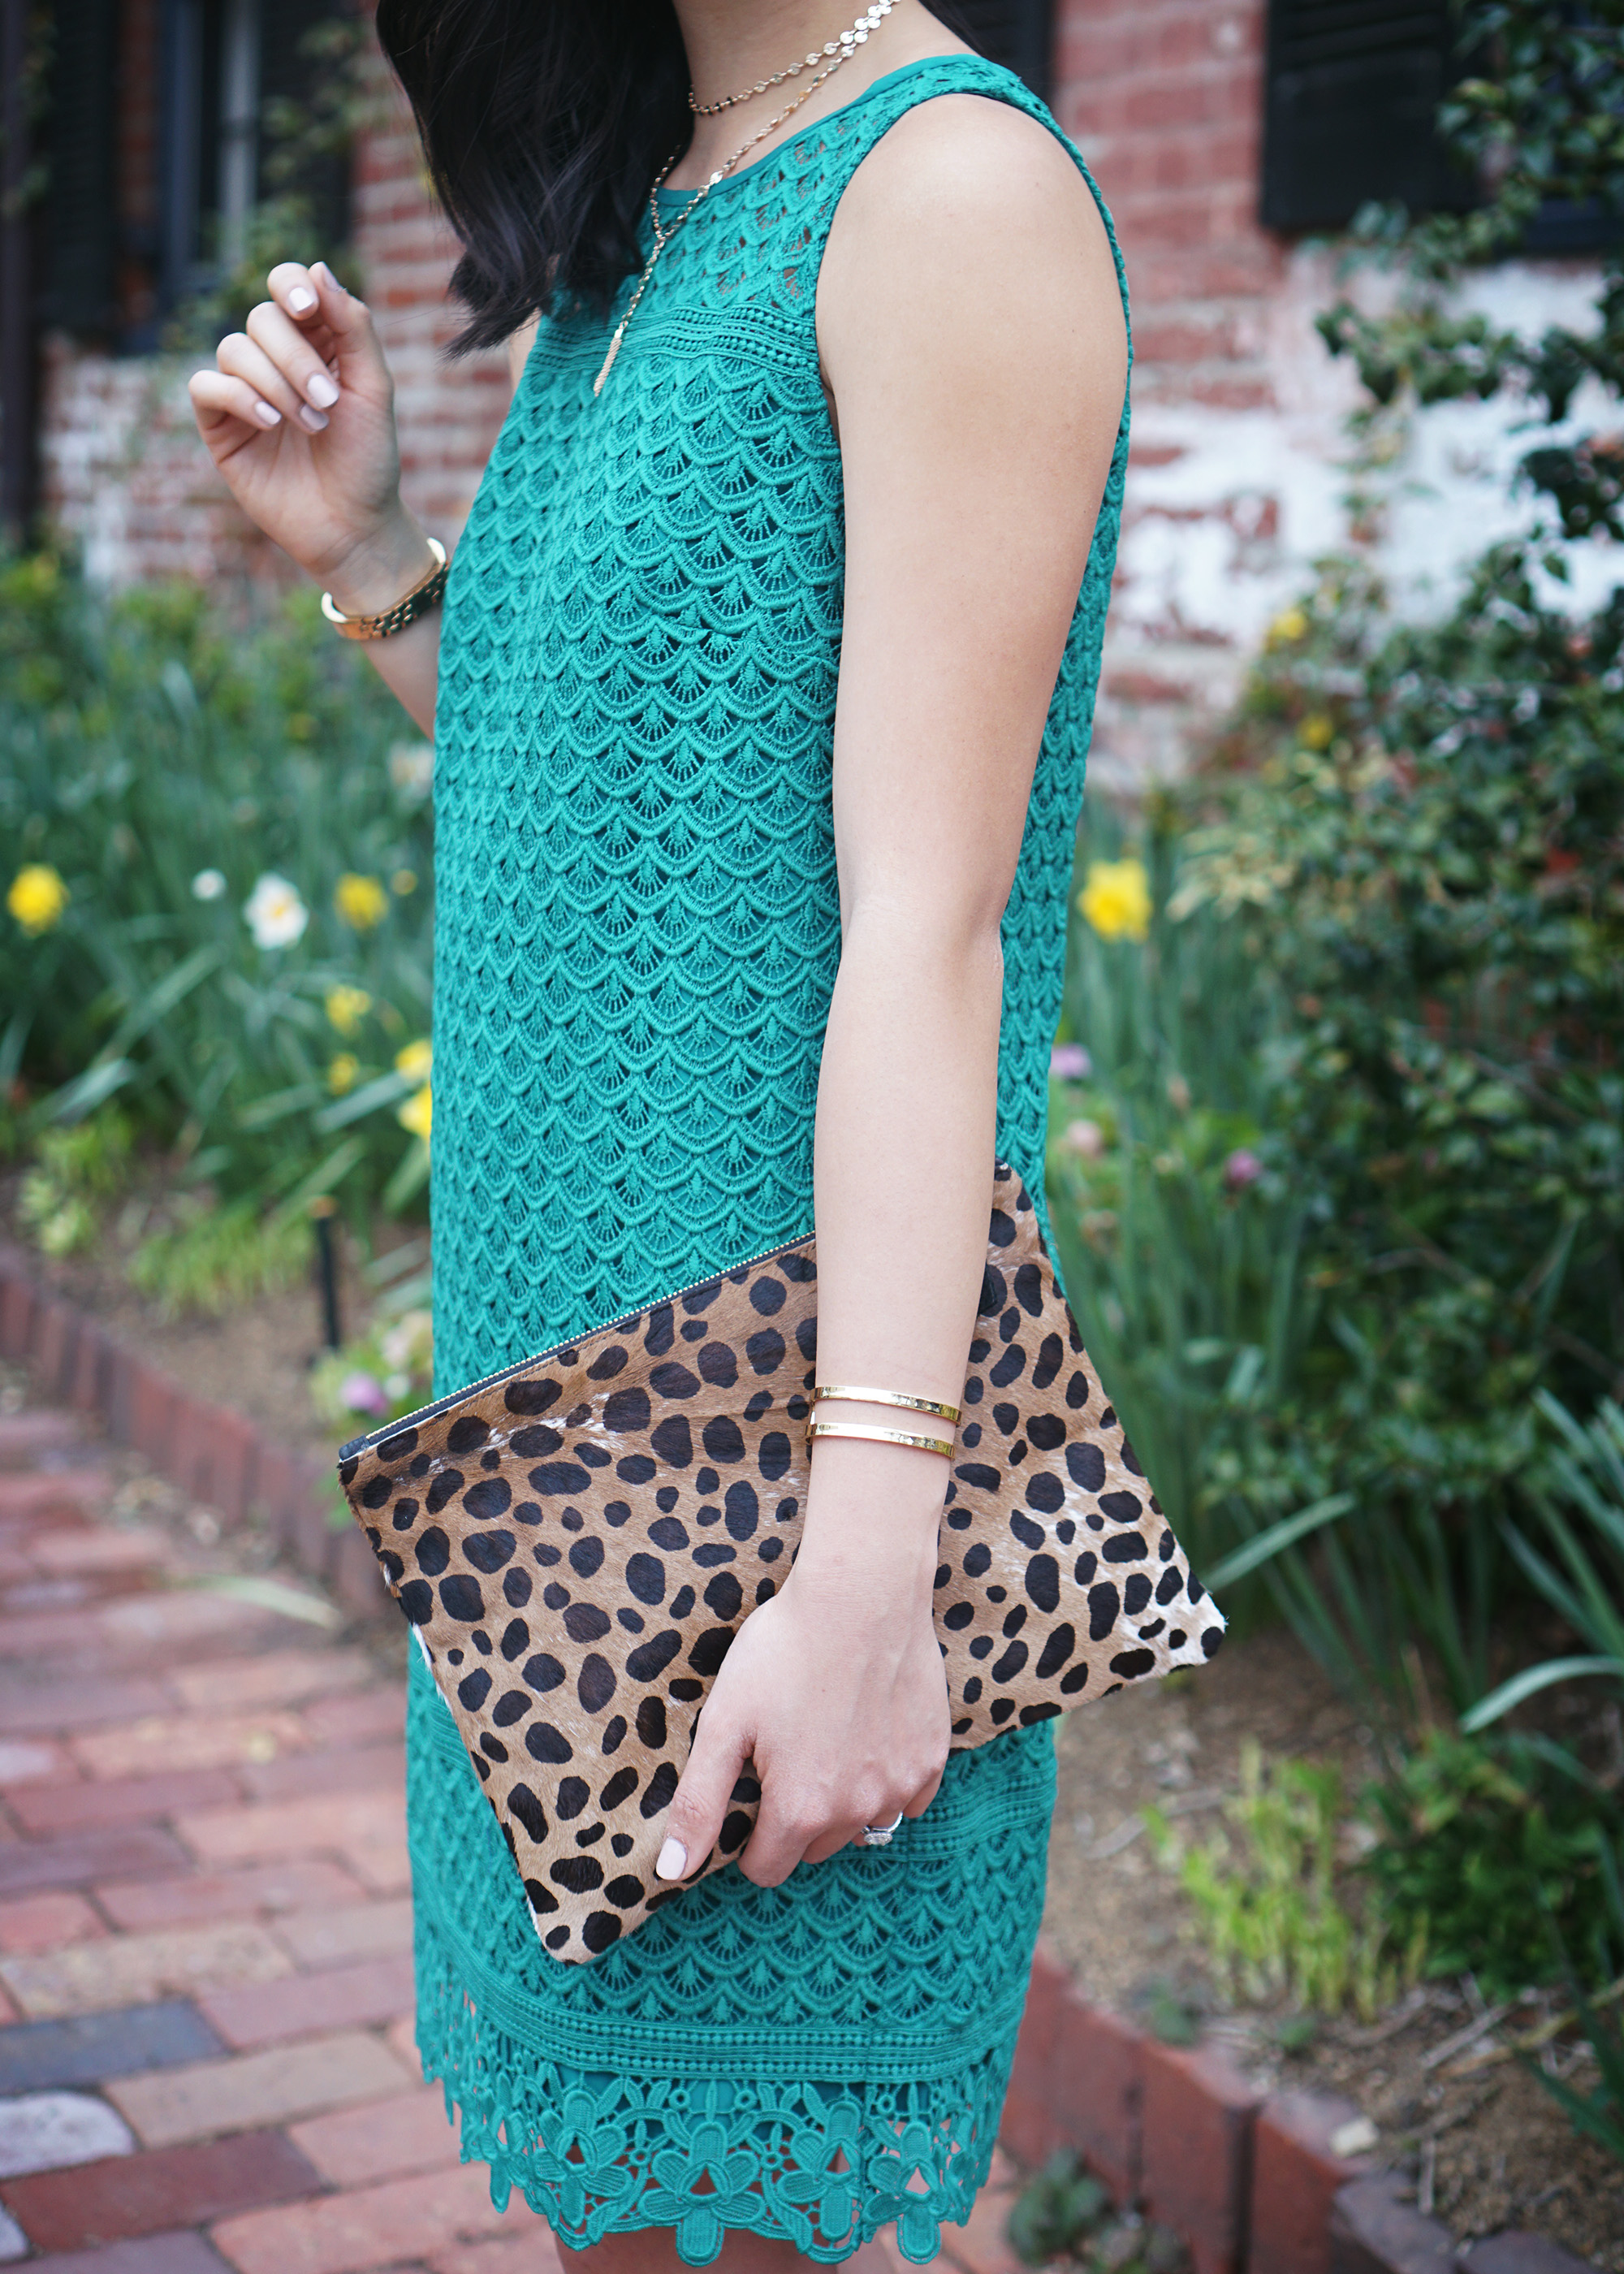 Skirt The Rules / Turquoise Lace Shift Dress